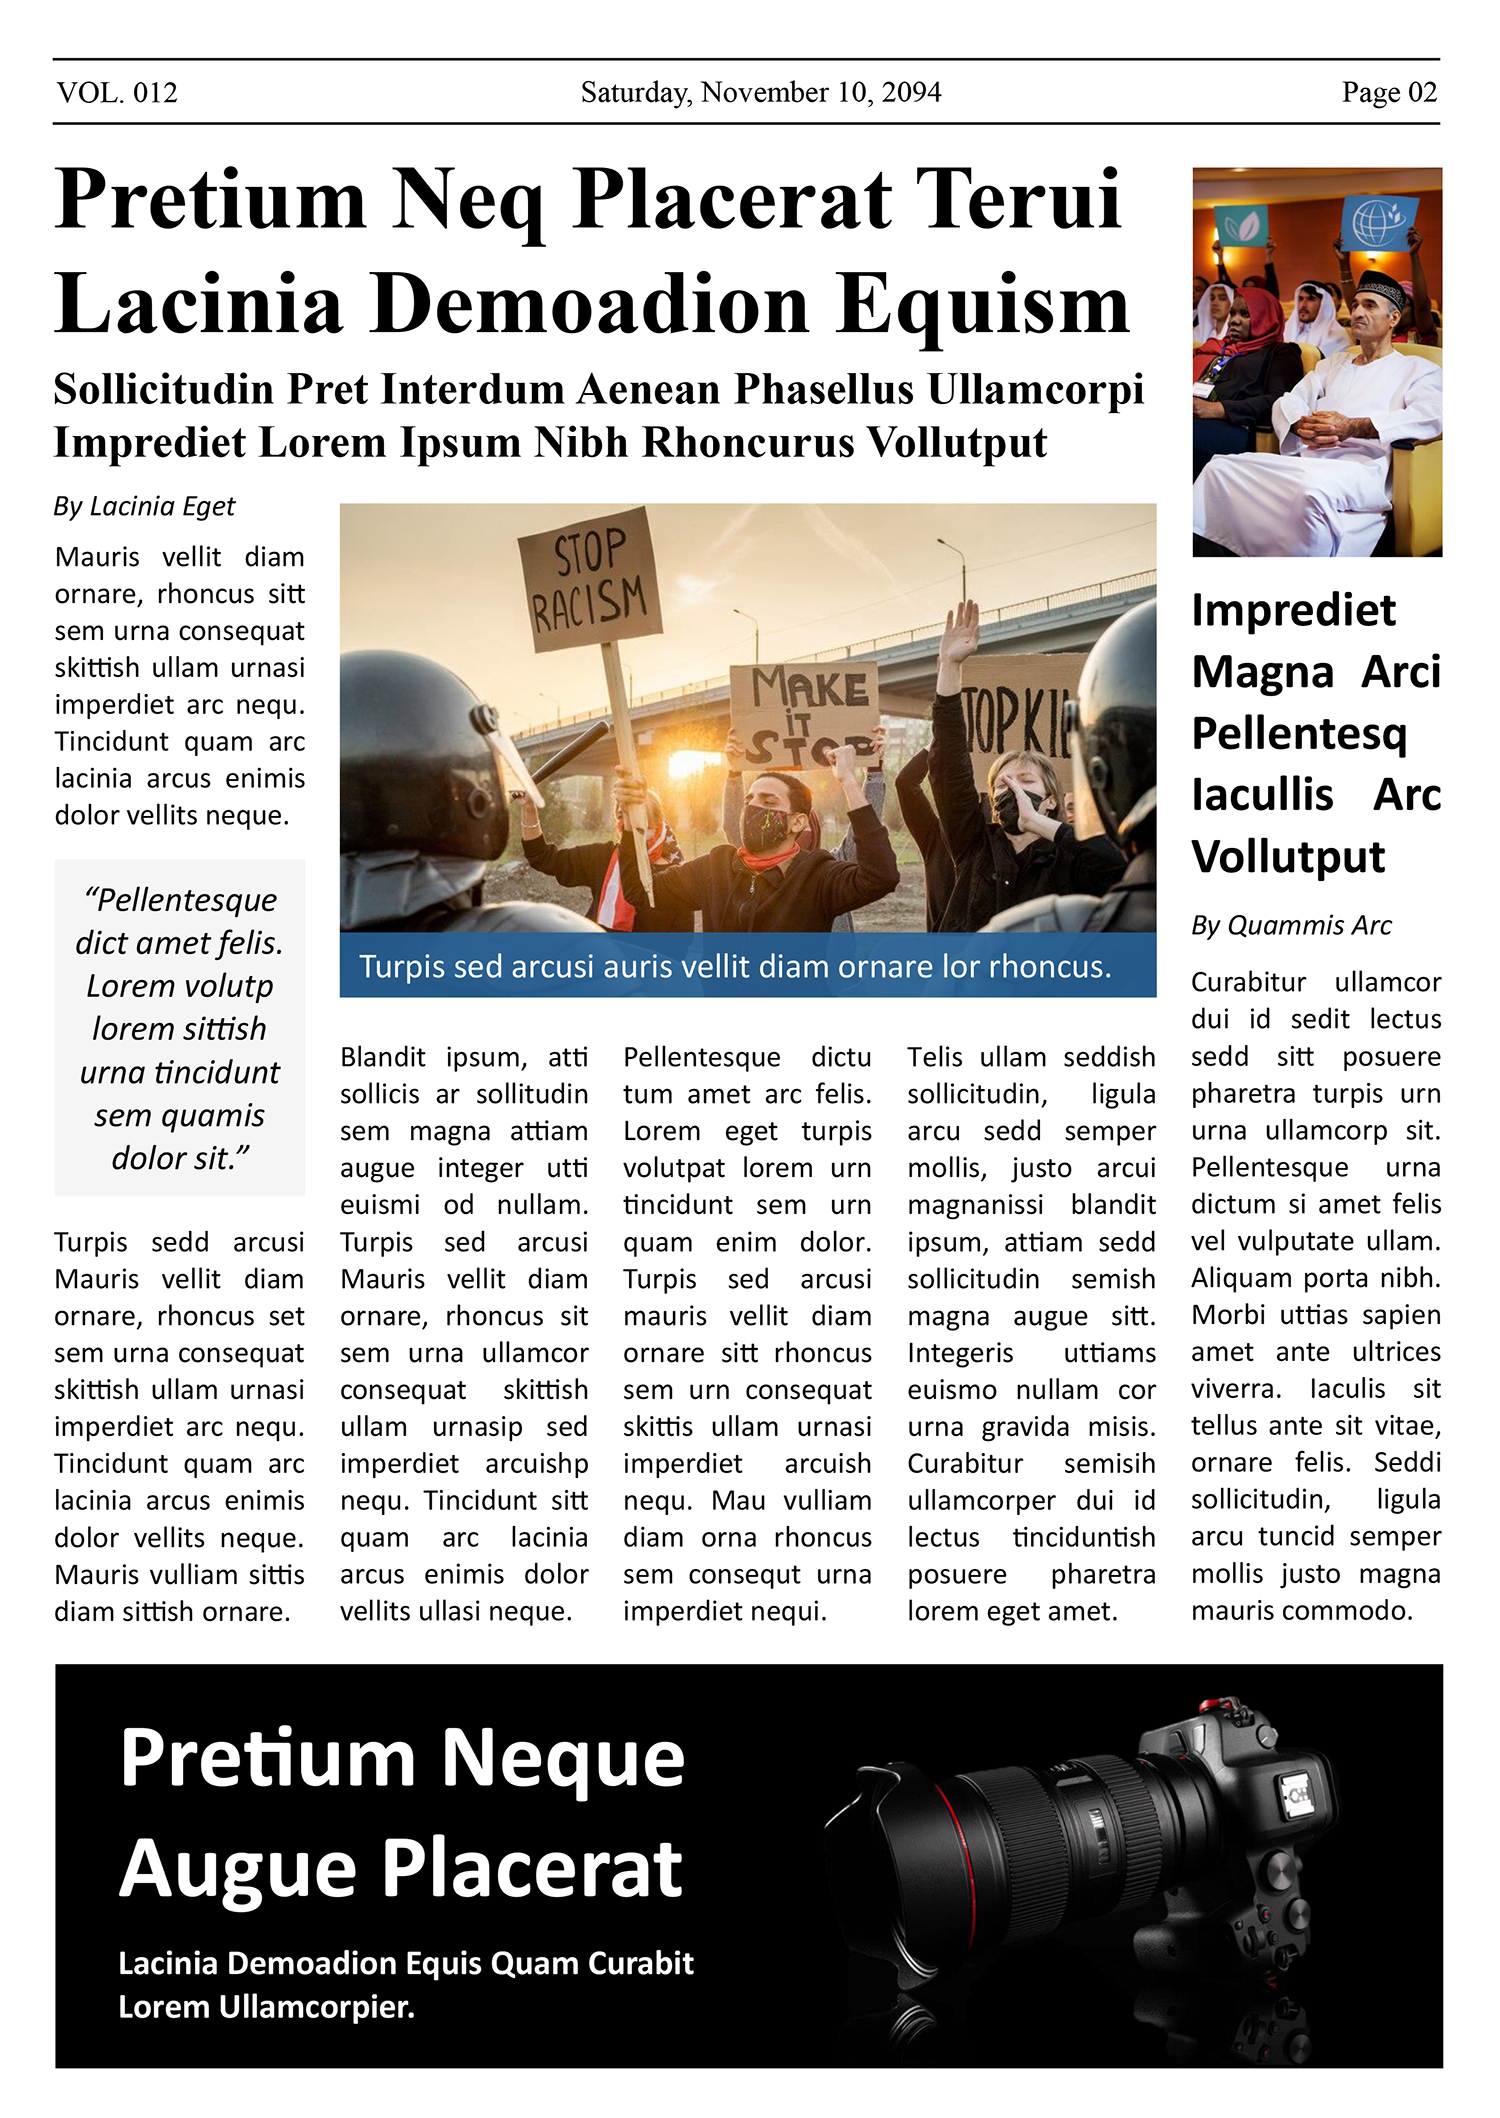 Minimal A4 Newspaper Article Template - Page 02